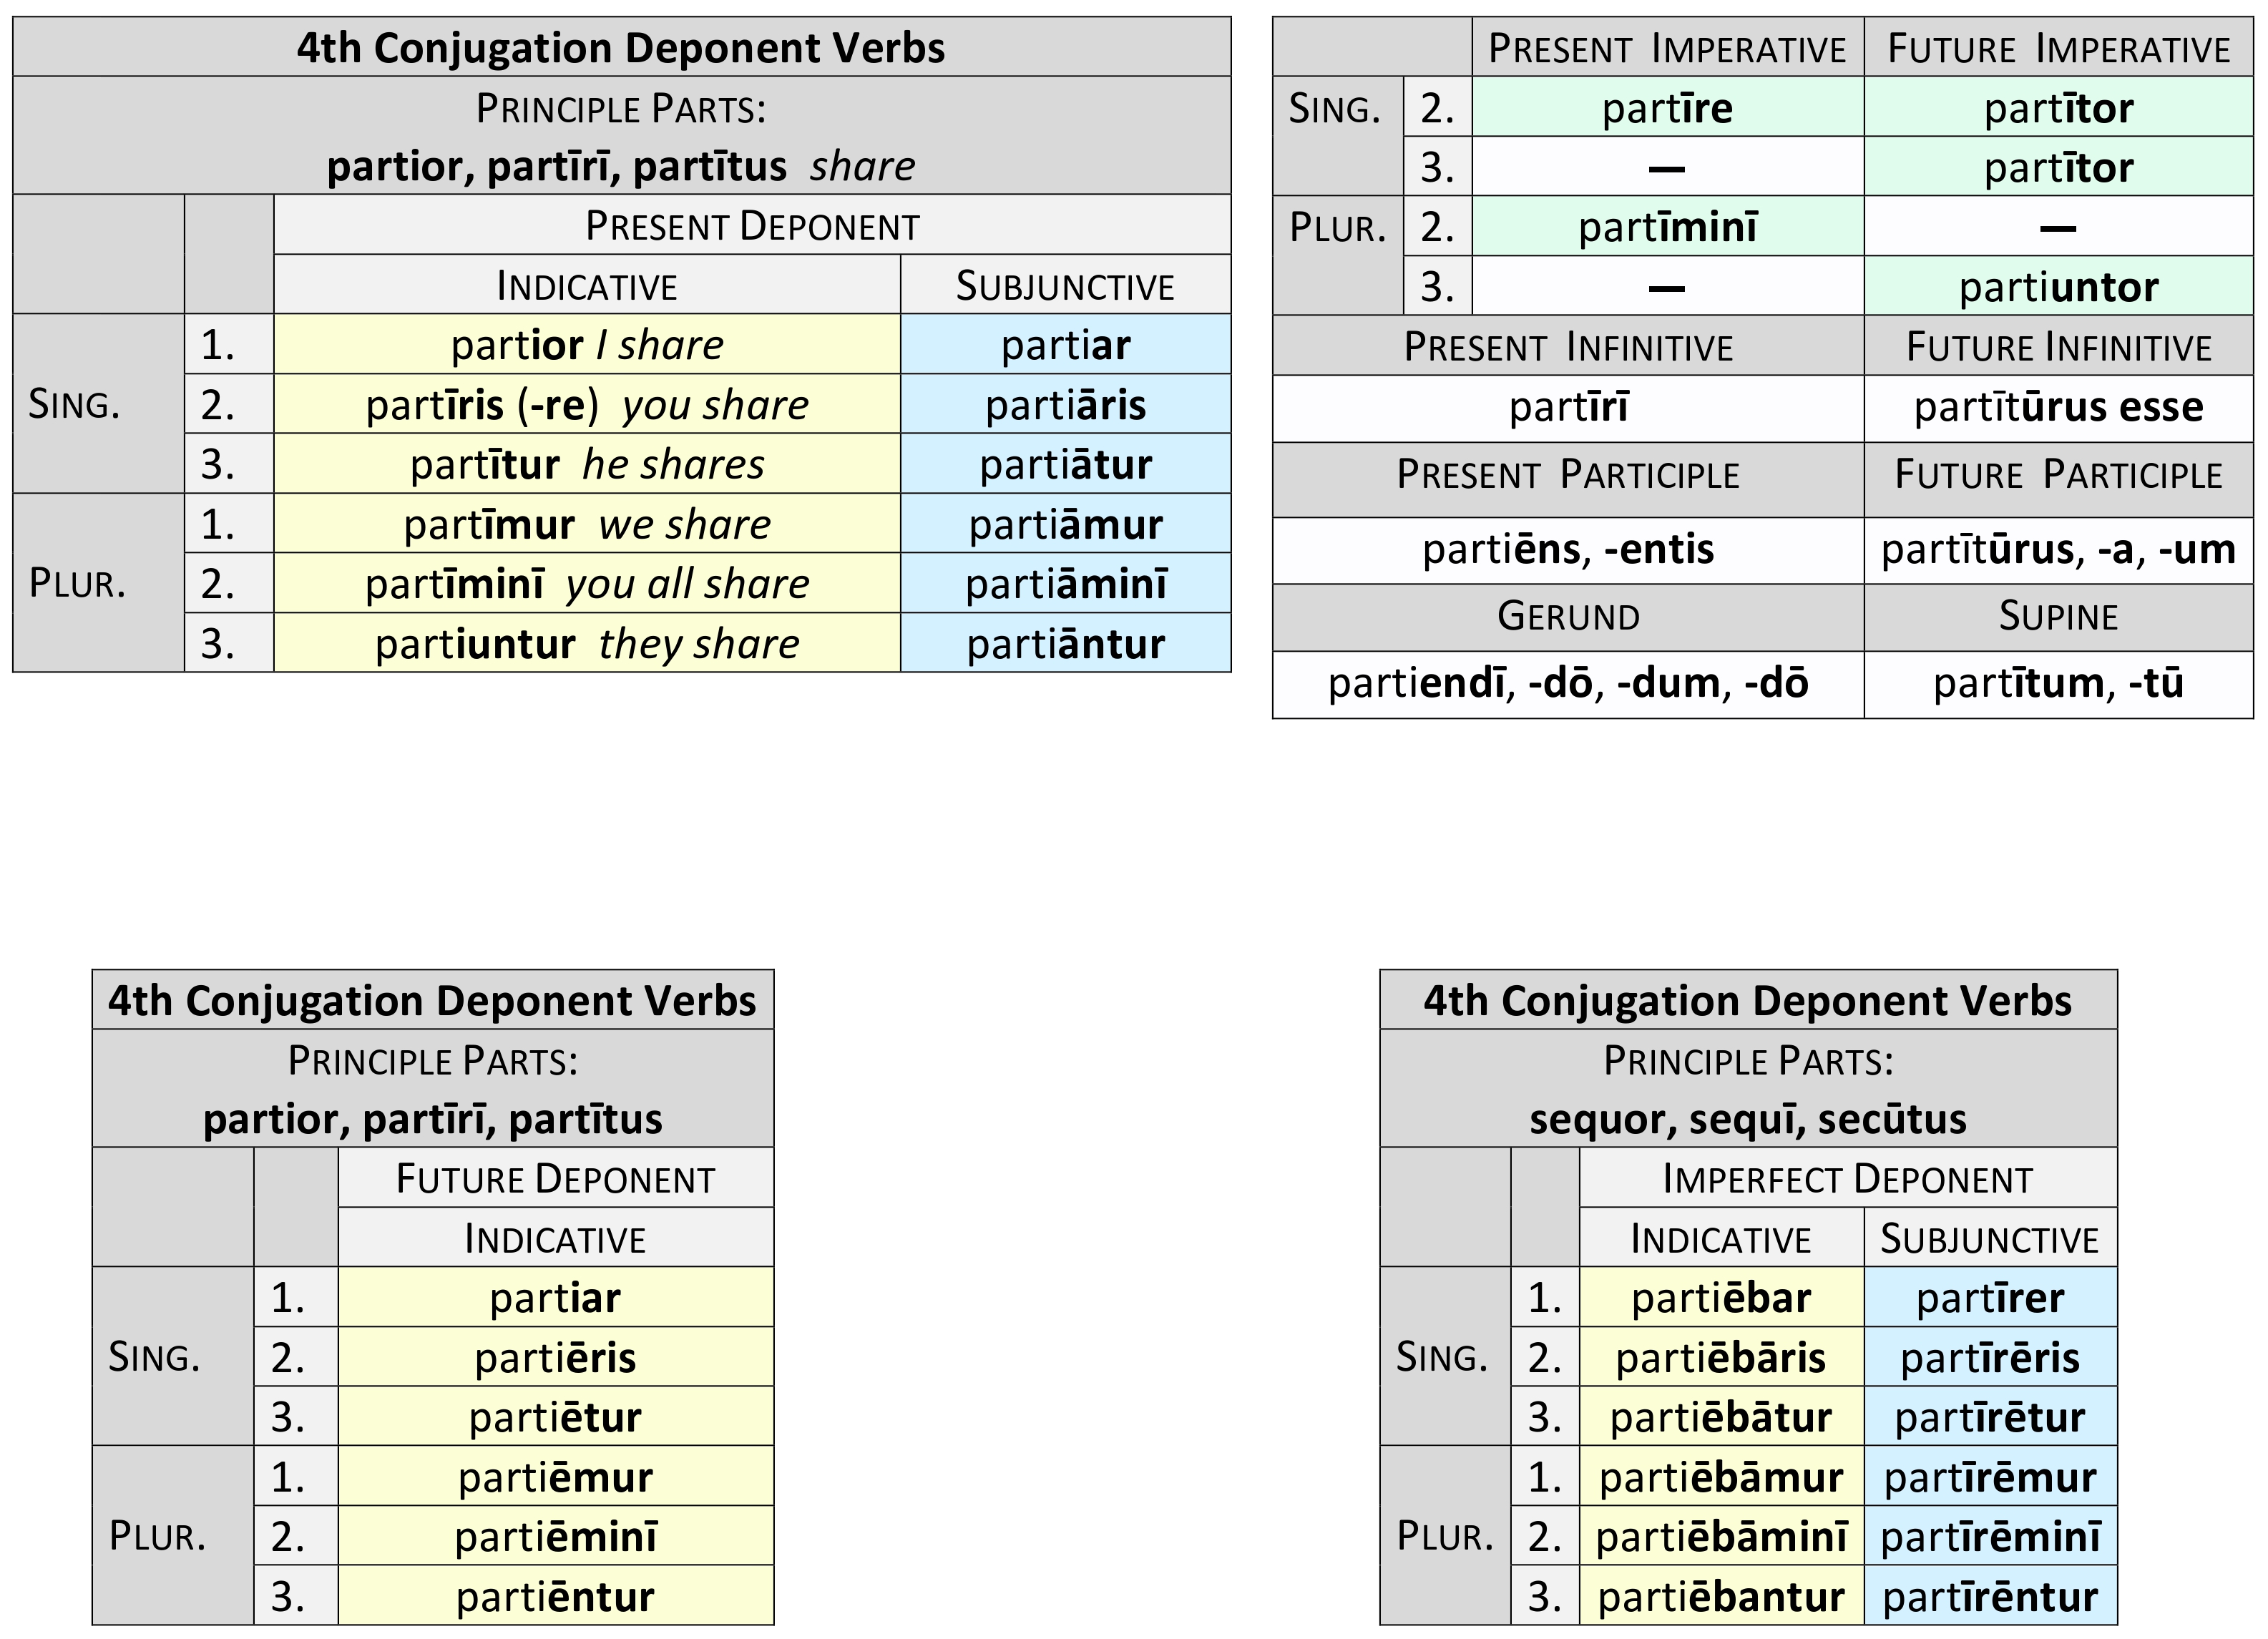 4th-conjugation-deponent-verbs-present-system-dickinson-college-commentaries